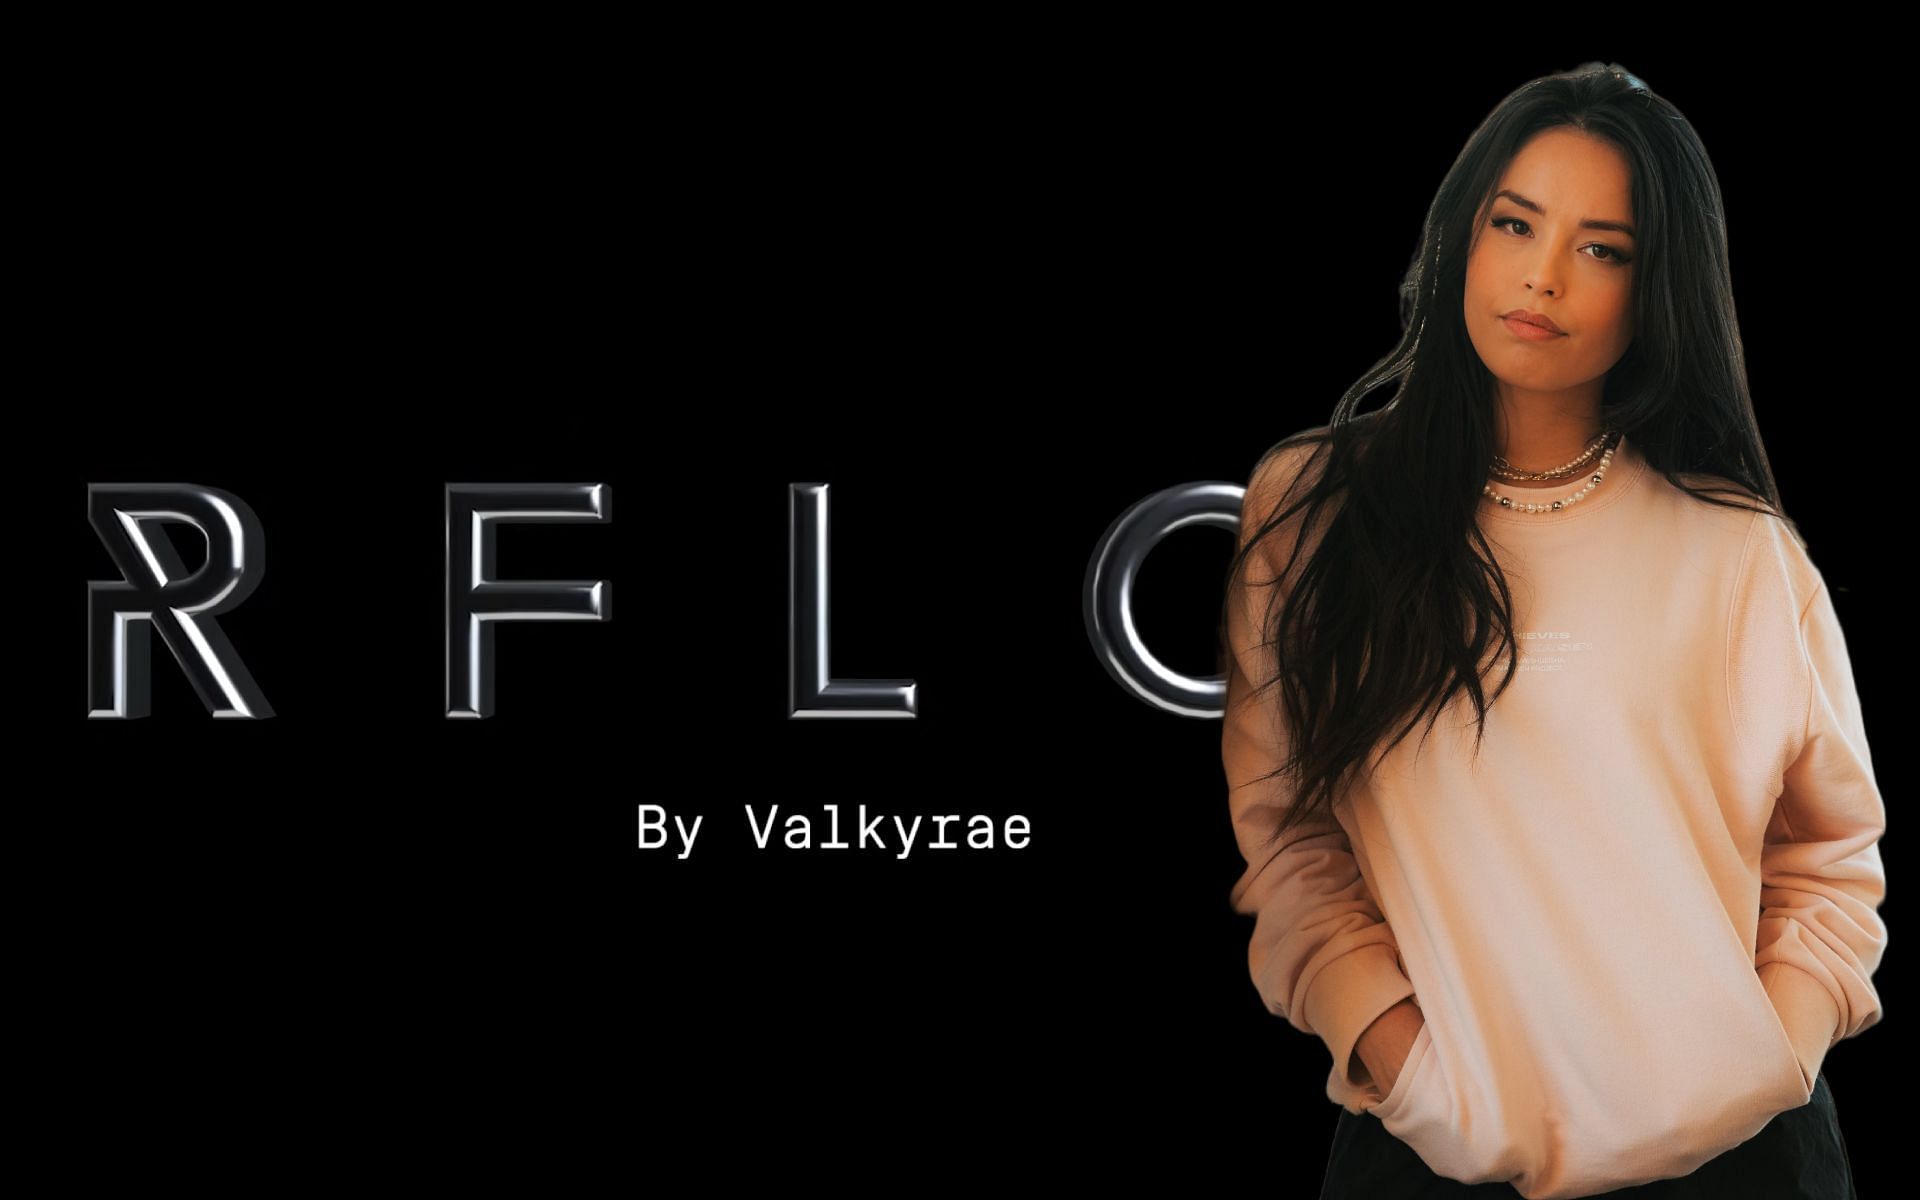 Taking a deep dive into Valkyrae